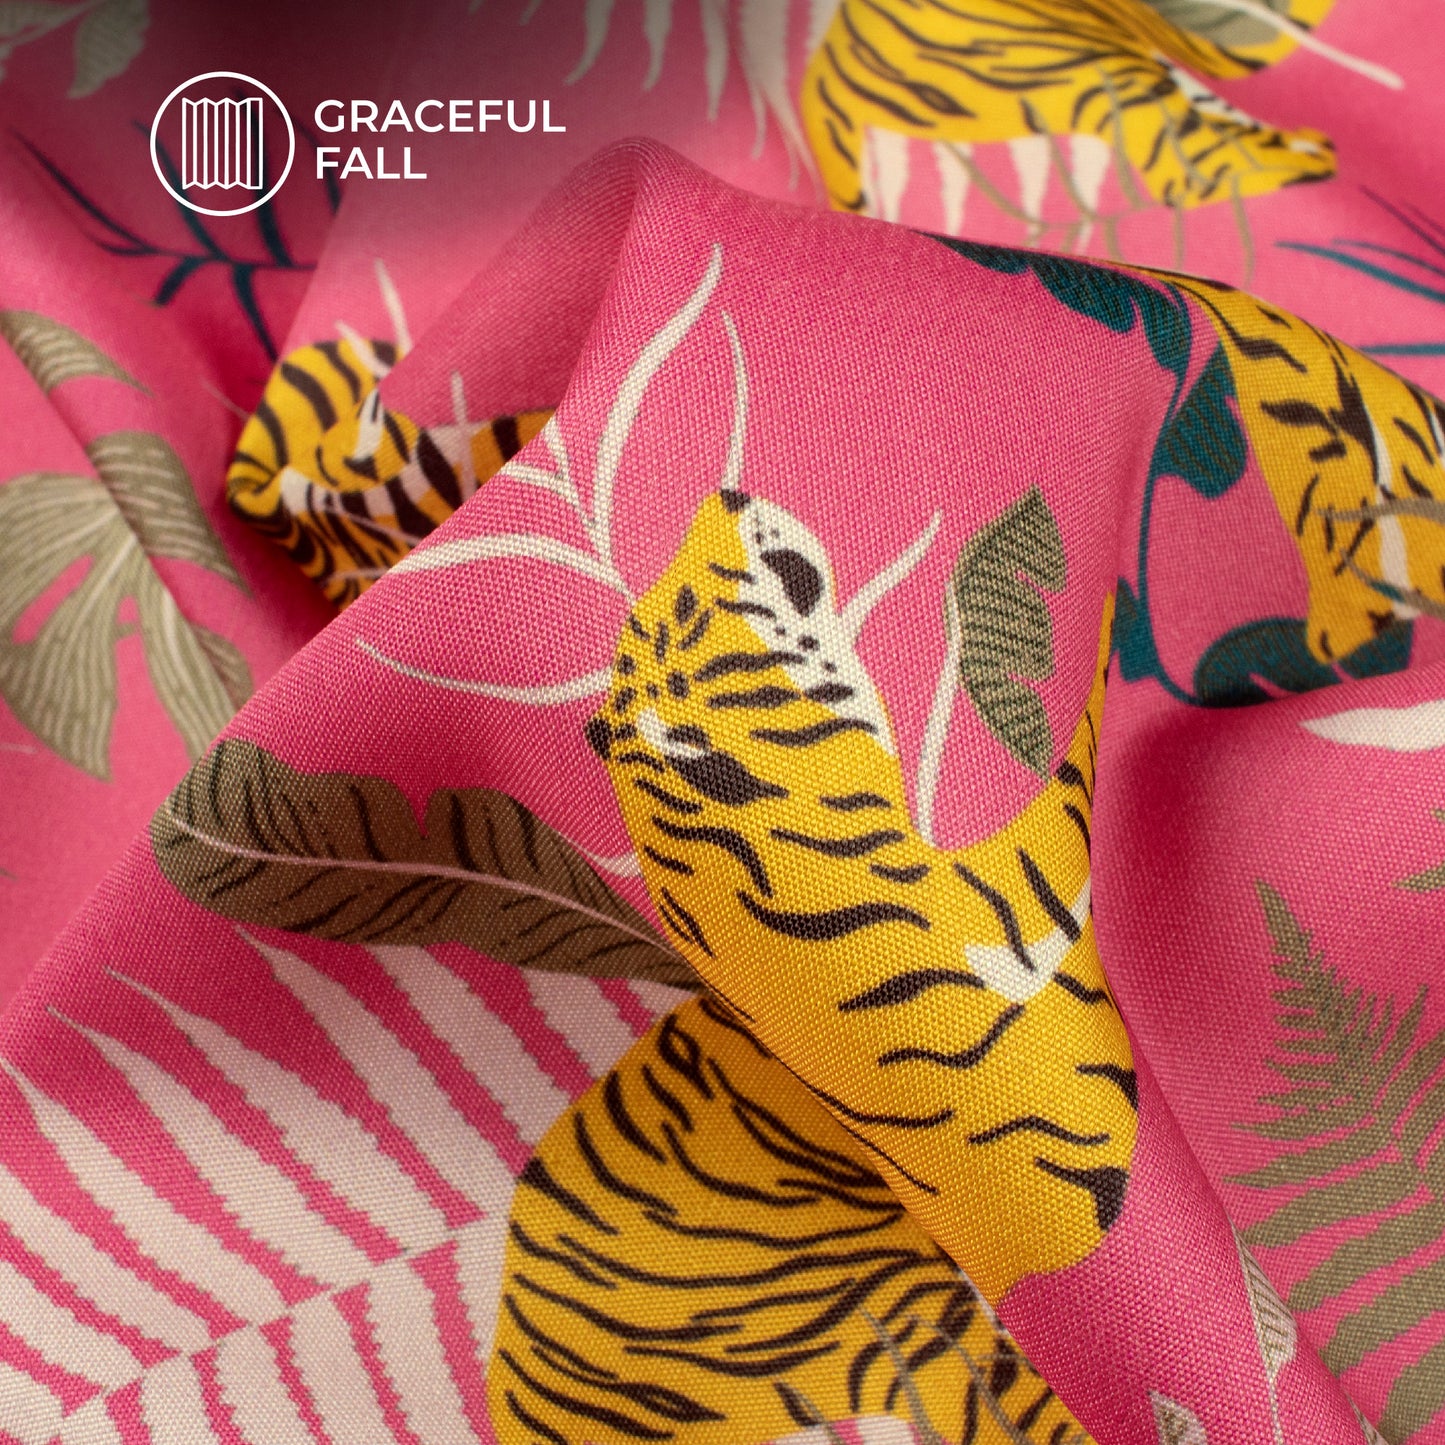 Pink And Yellow Tiger Digital Print Butter Crepe Fabric